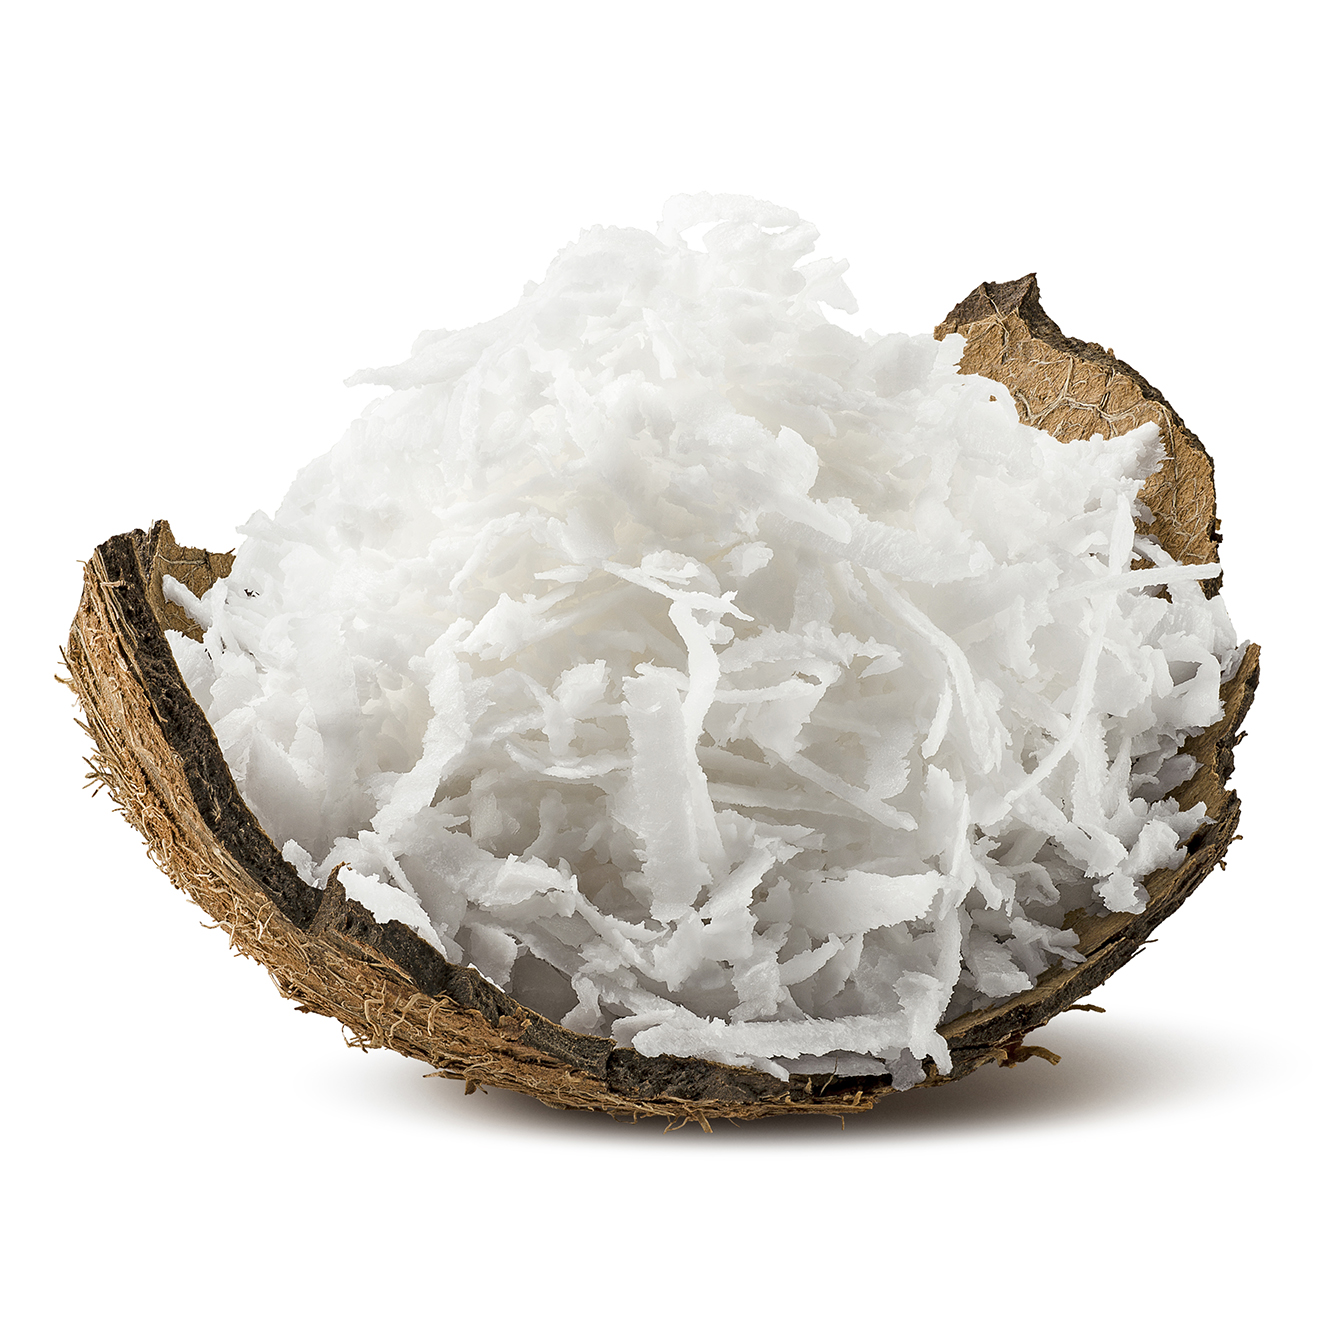 Coconut and Its Products